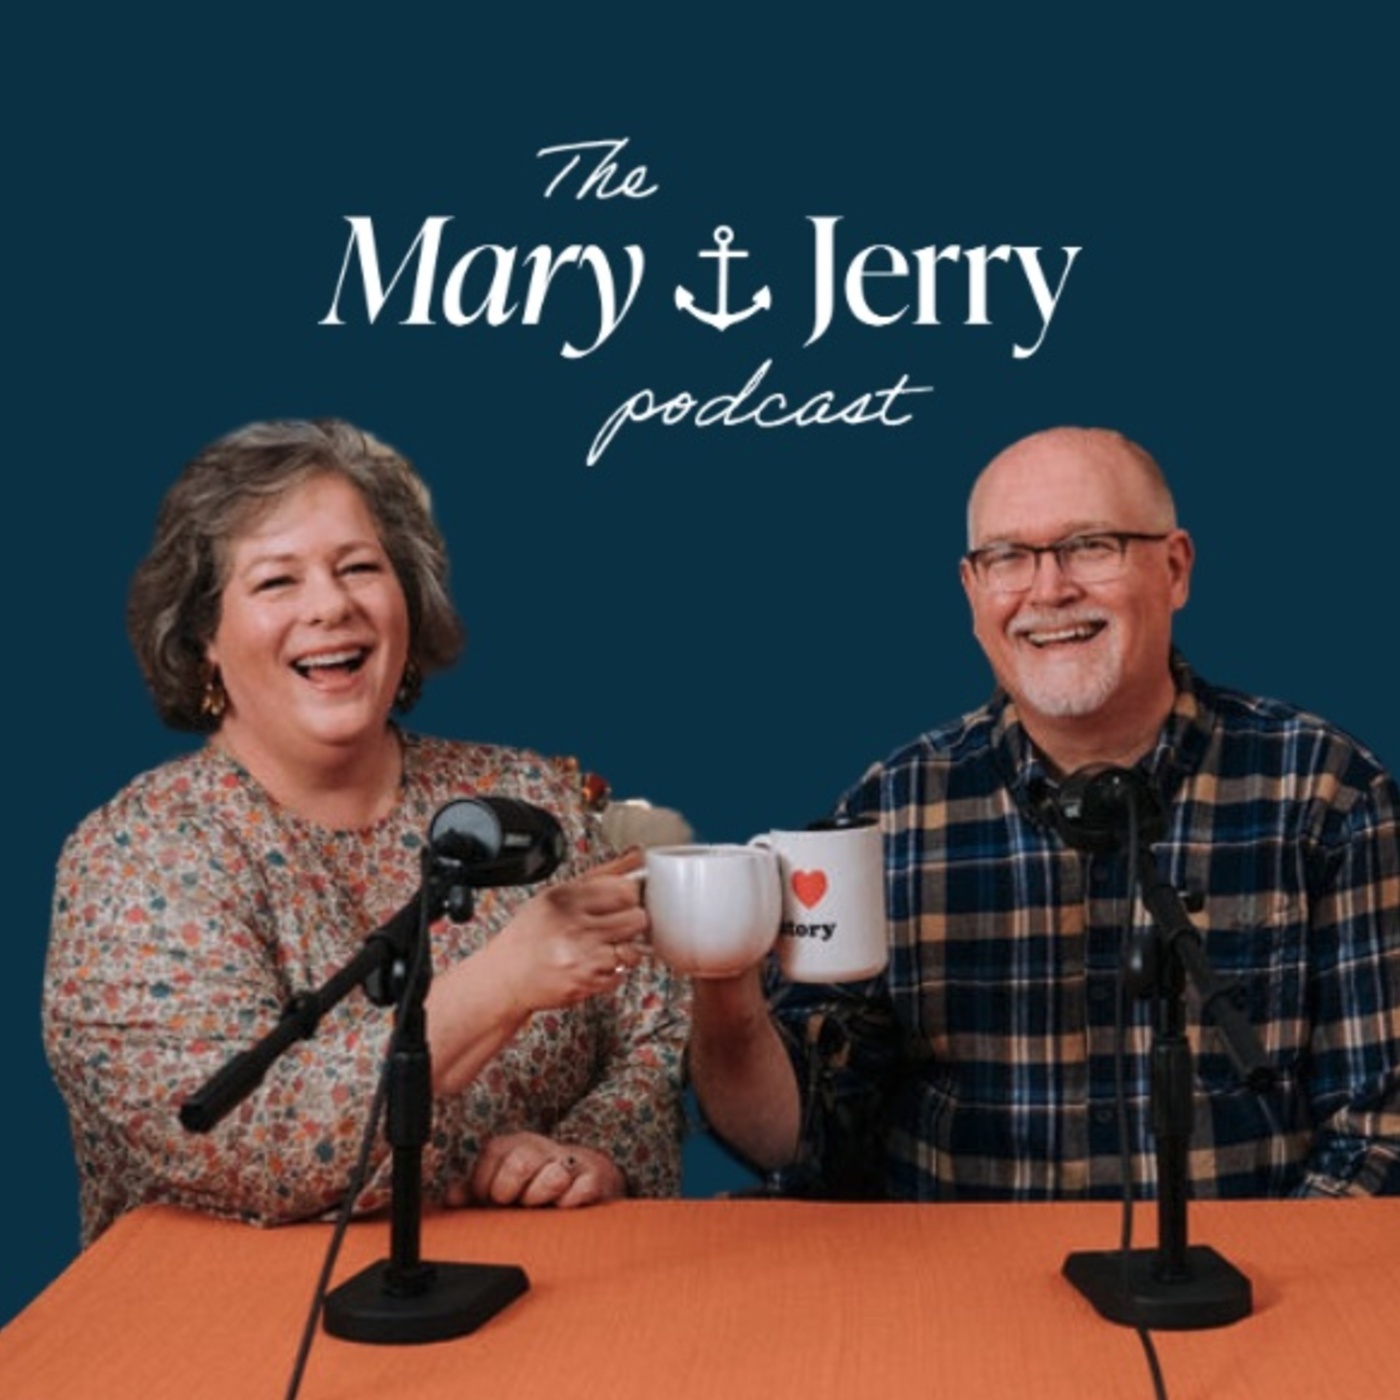 The Mary and Jerry Podcast 19: Lourdes & Courtney's Prayer Stocking